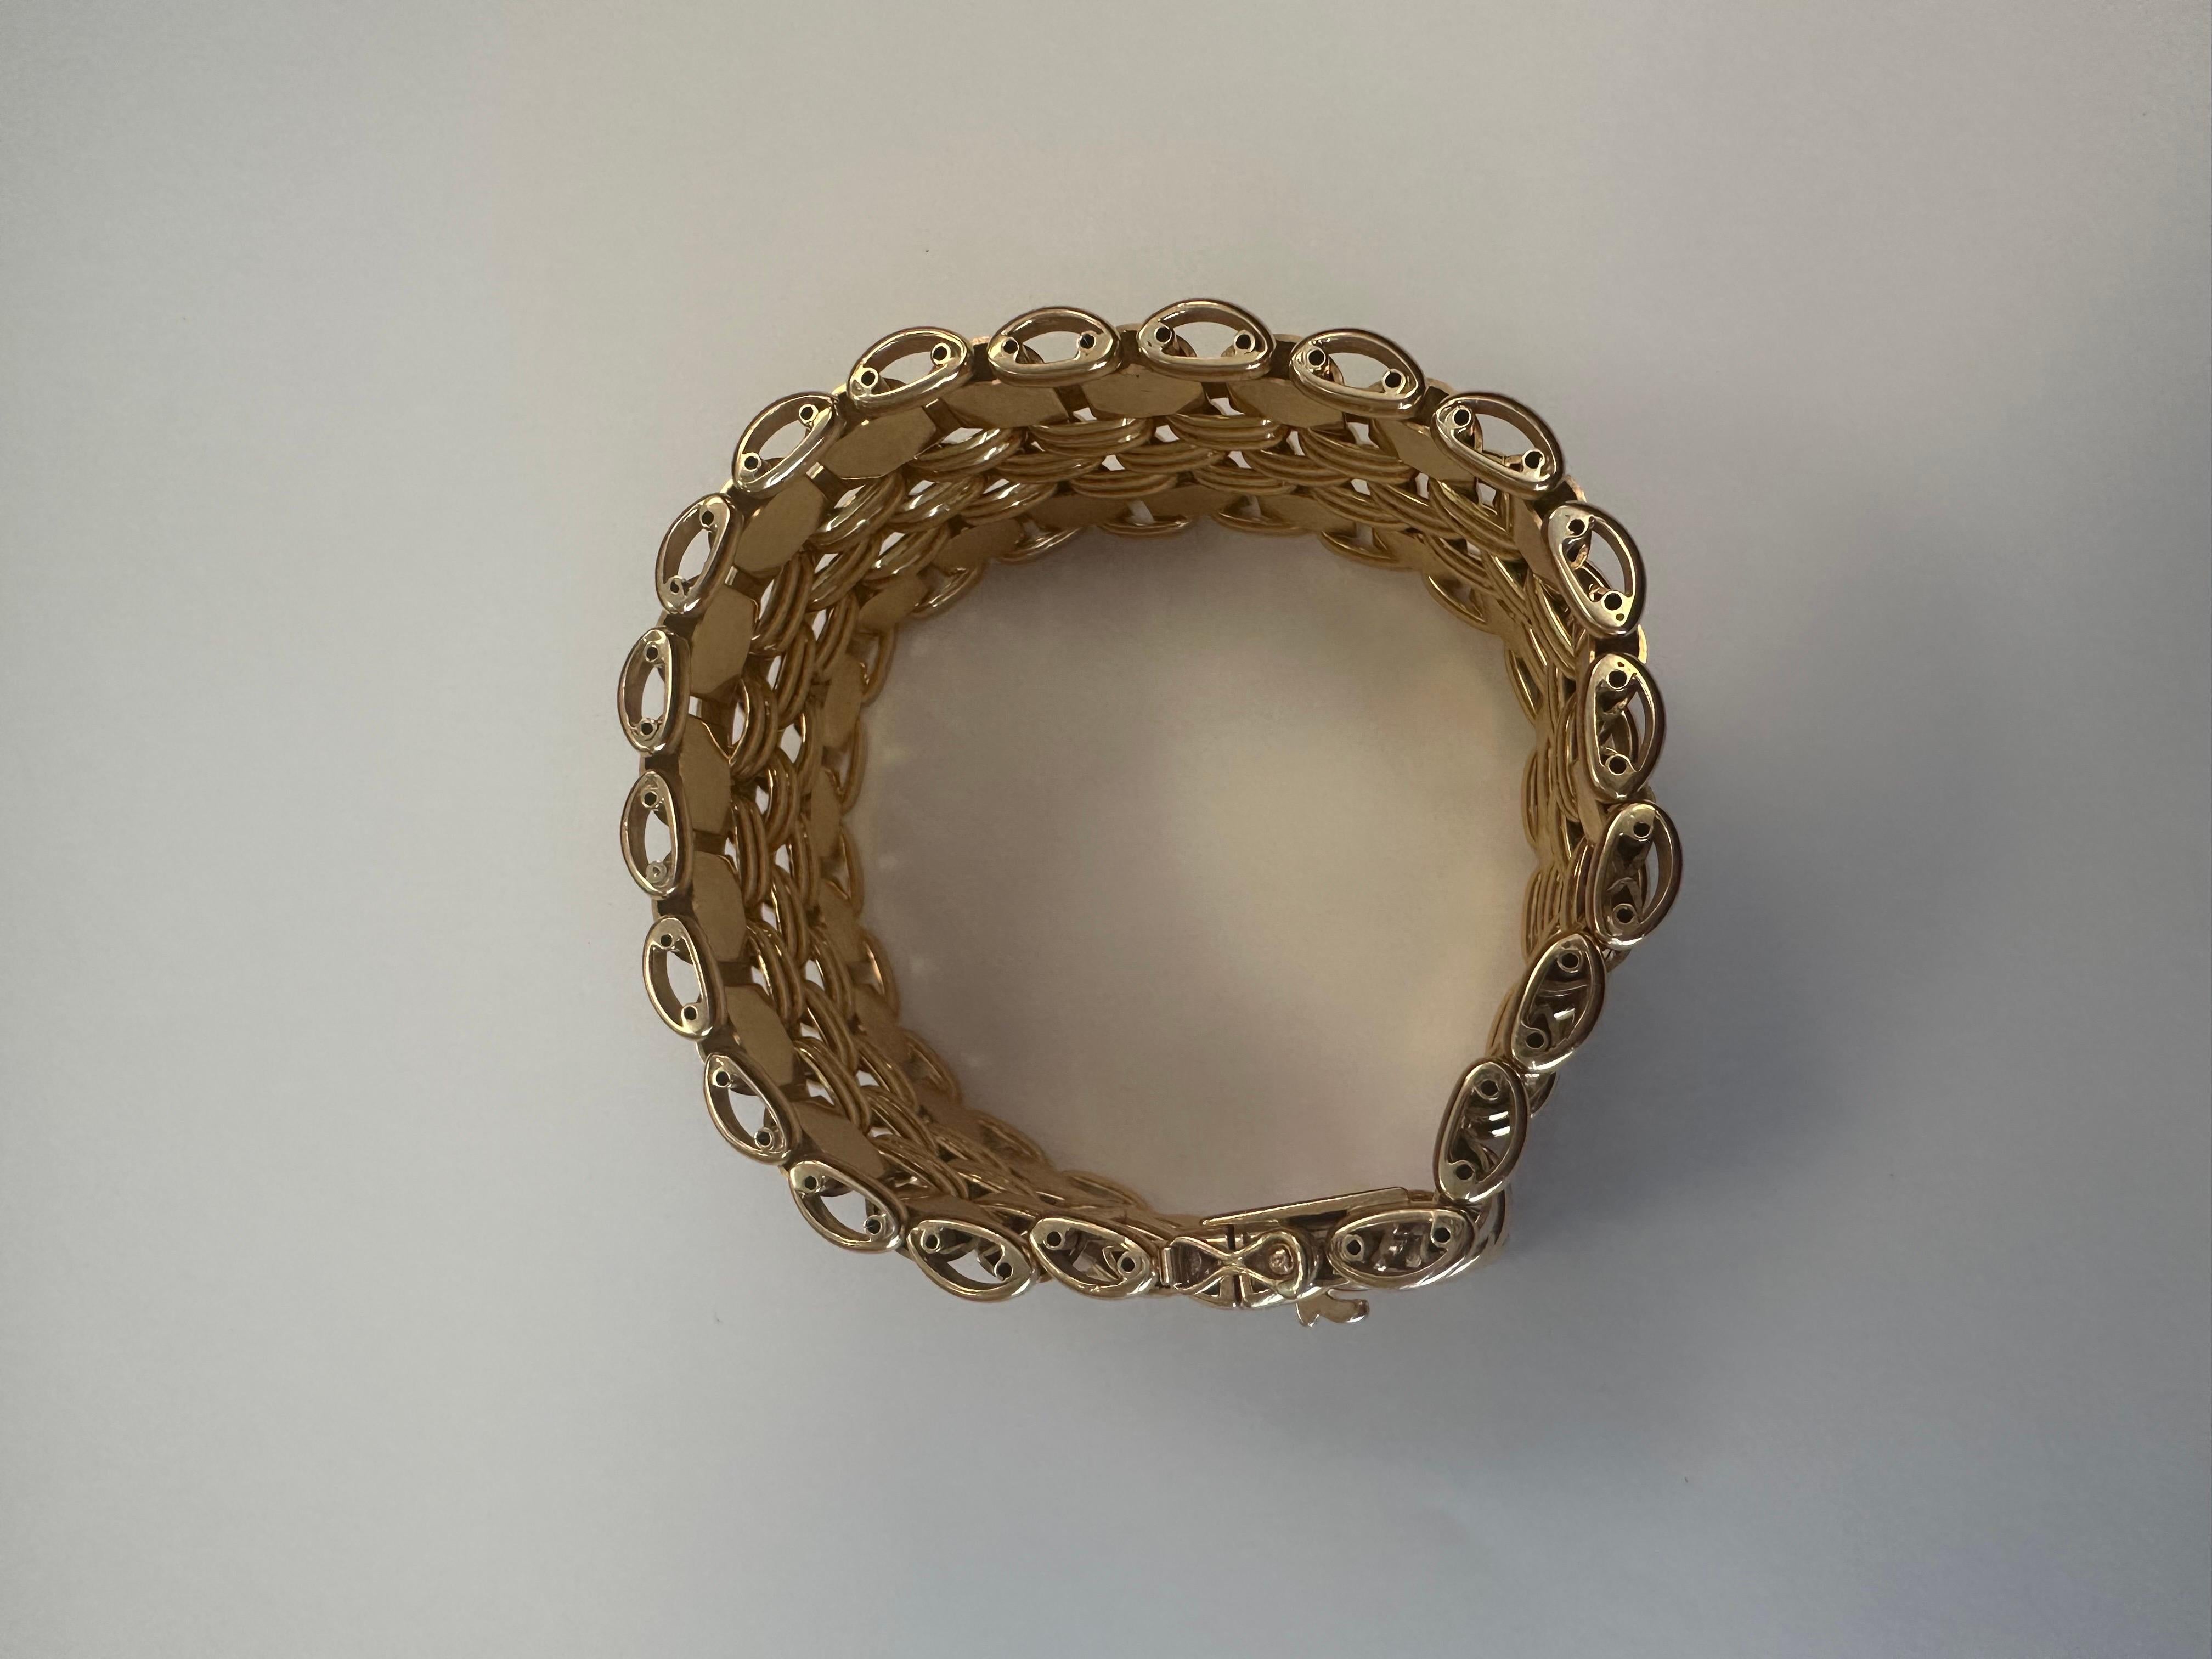 Lady's 18K rose gold flexible link bracelet, 7.25 inches long and 1.25 inches wide, weighing 132.3 grams, circa 1940.